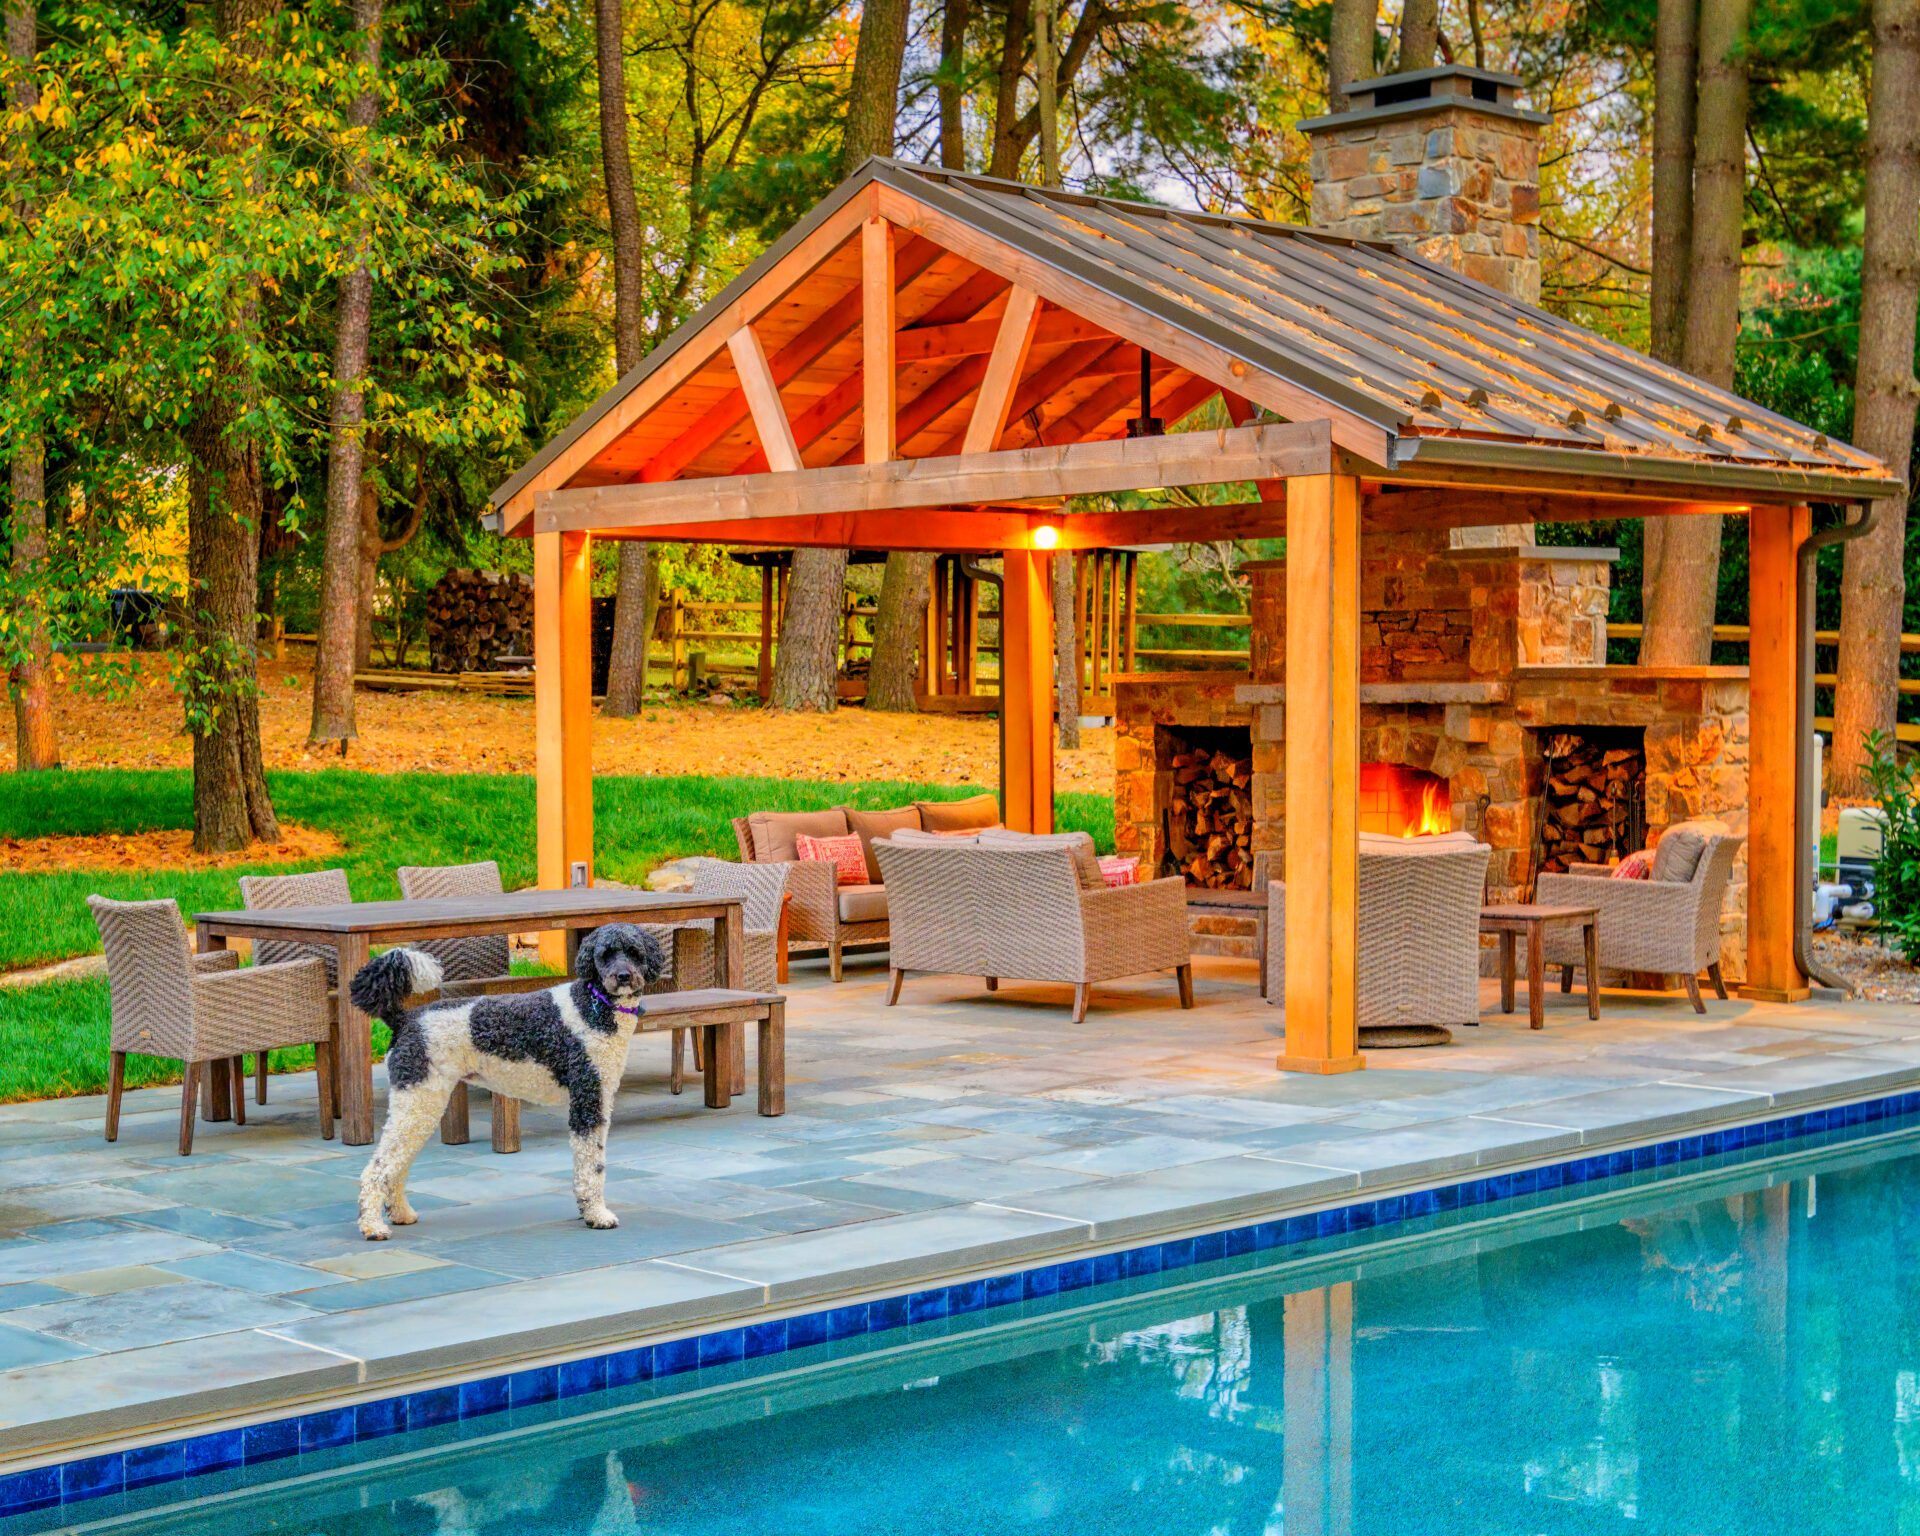 Custom Pool, Pergola, Outdoor Fireplace, and more